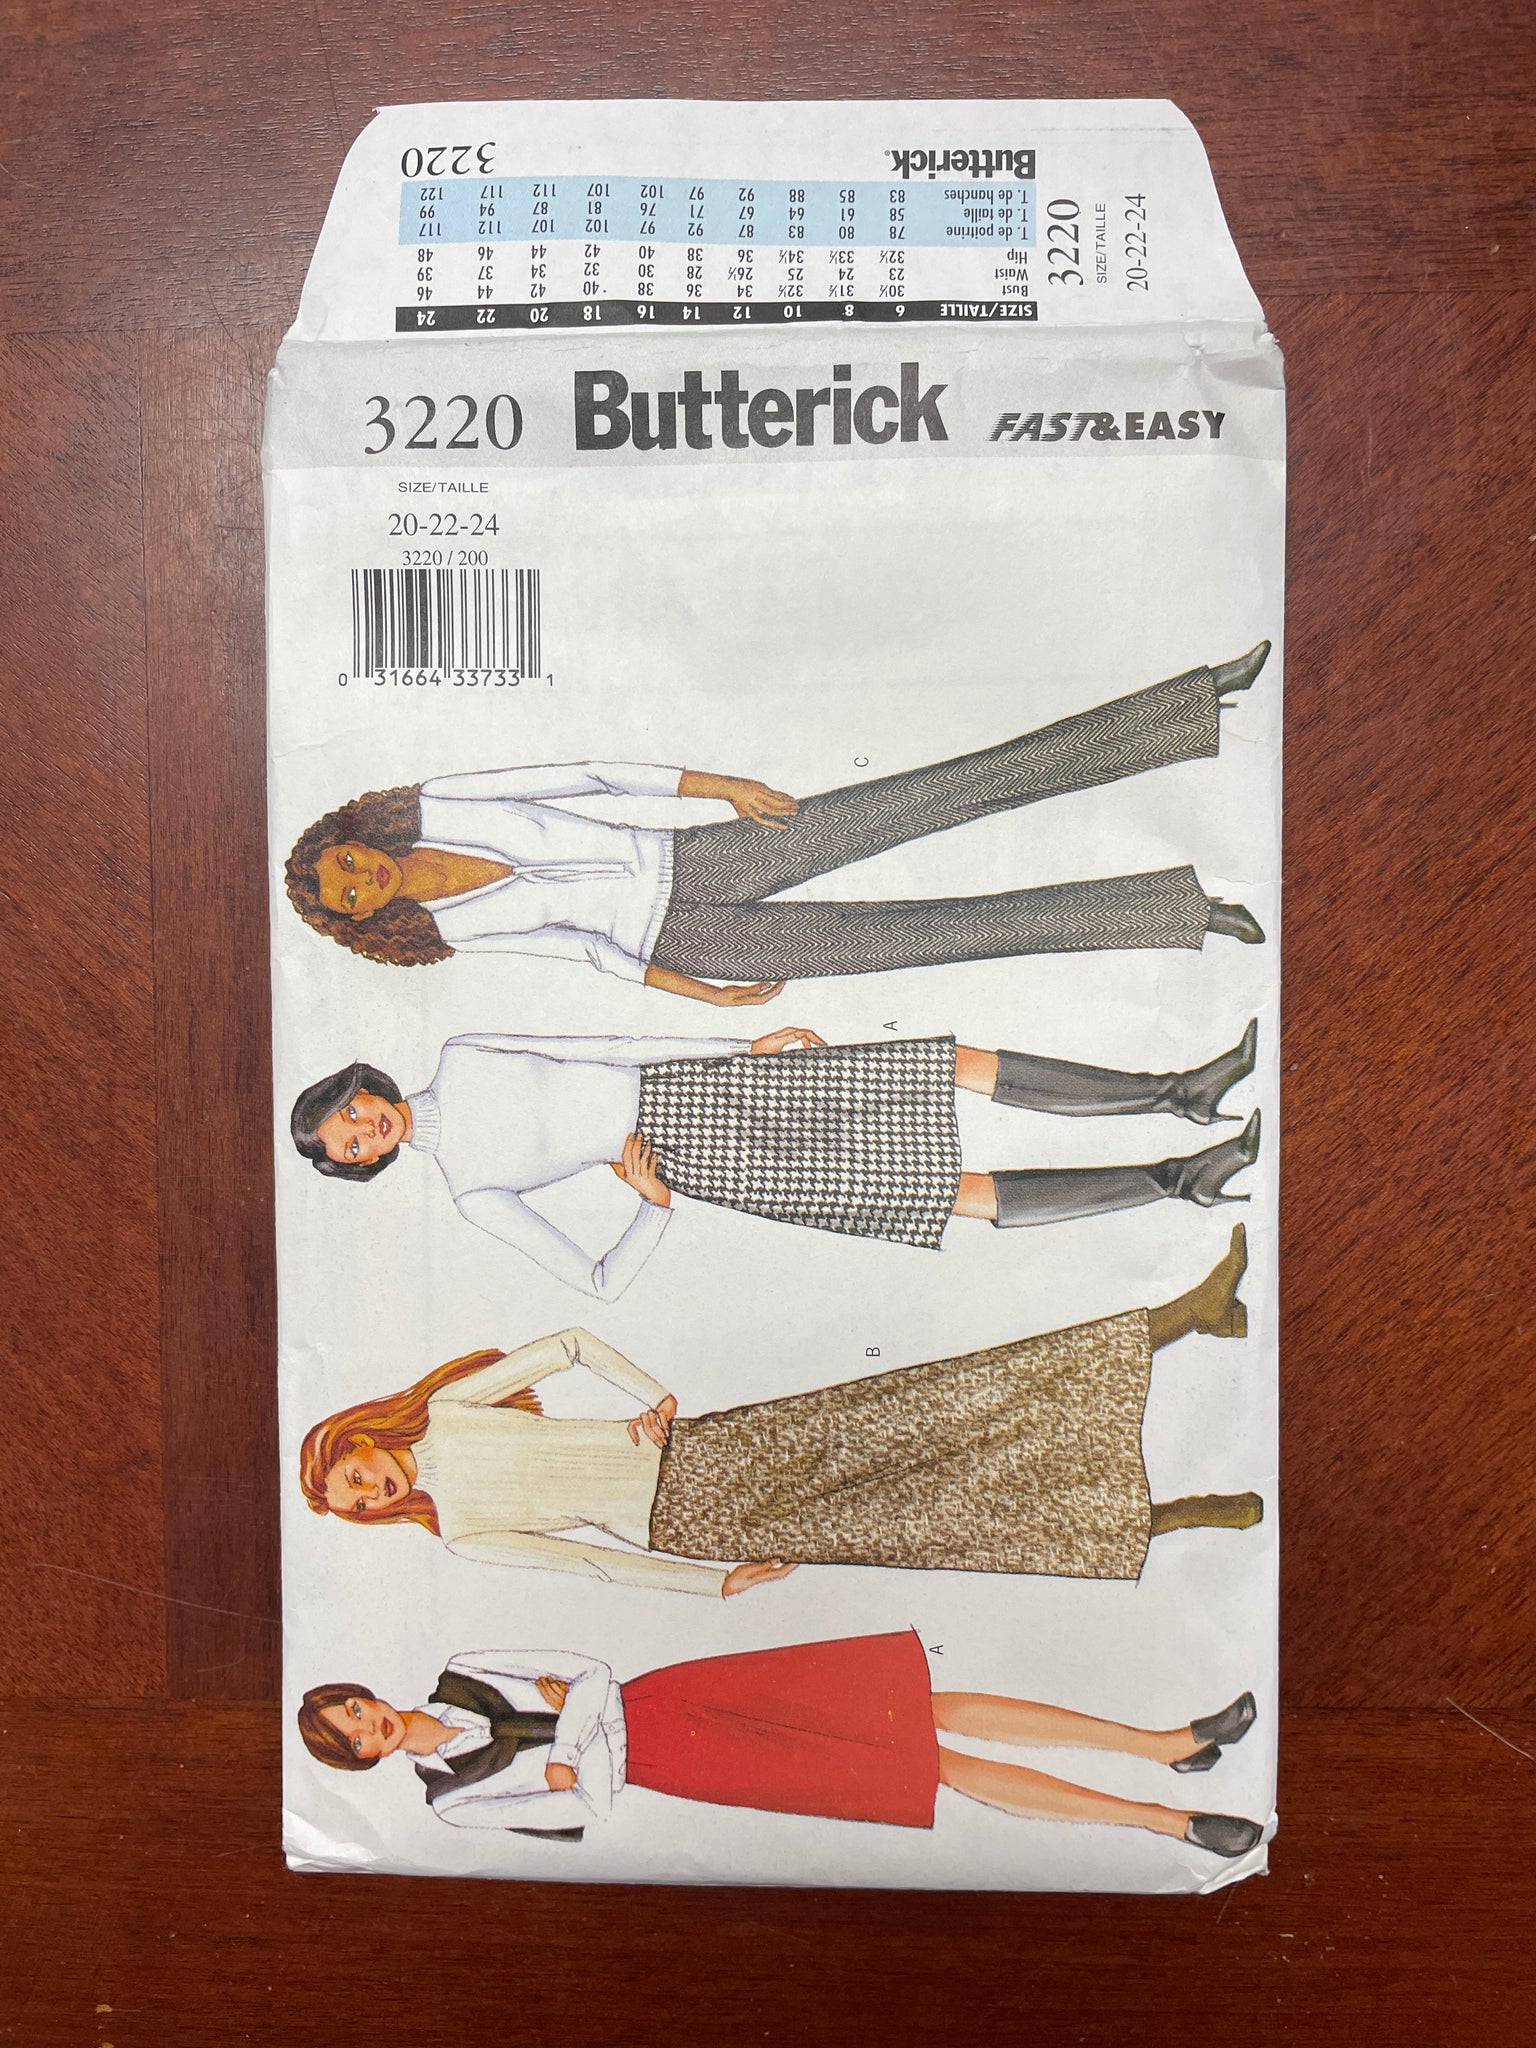 2001 Butterick 3220 Pattern - Skirt and Pants FACTORY FOLDED